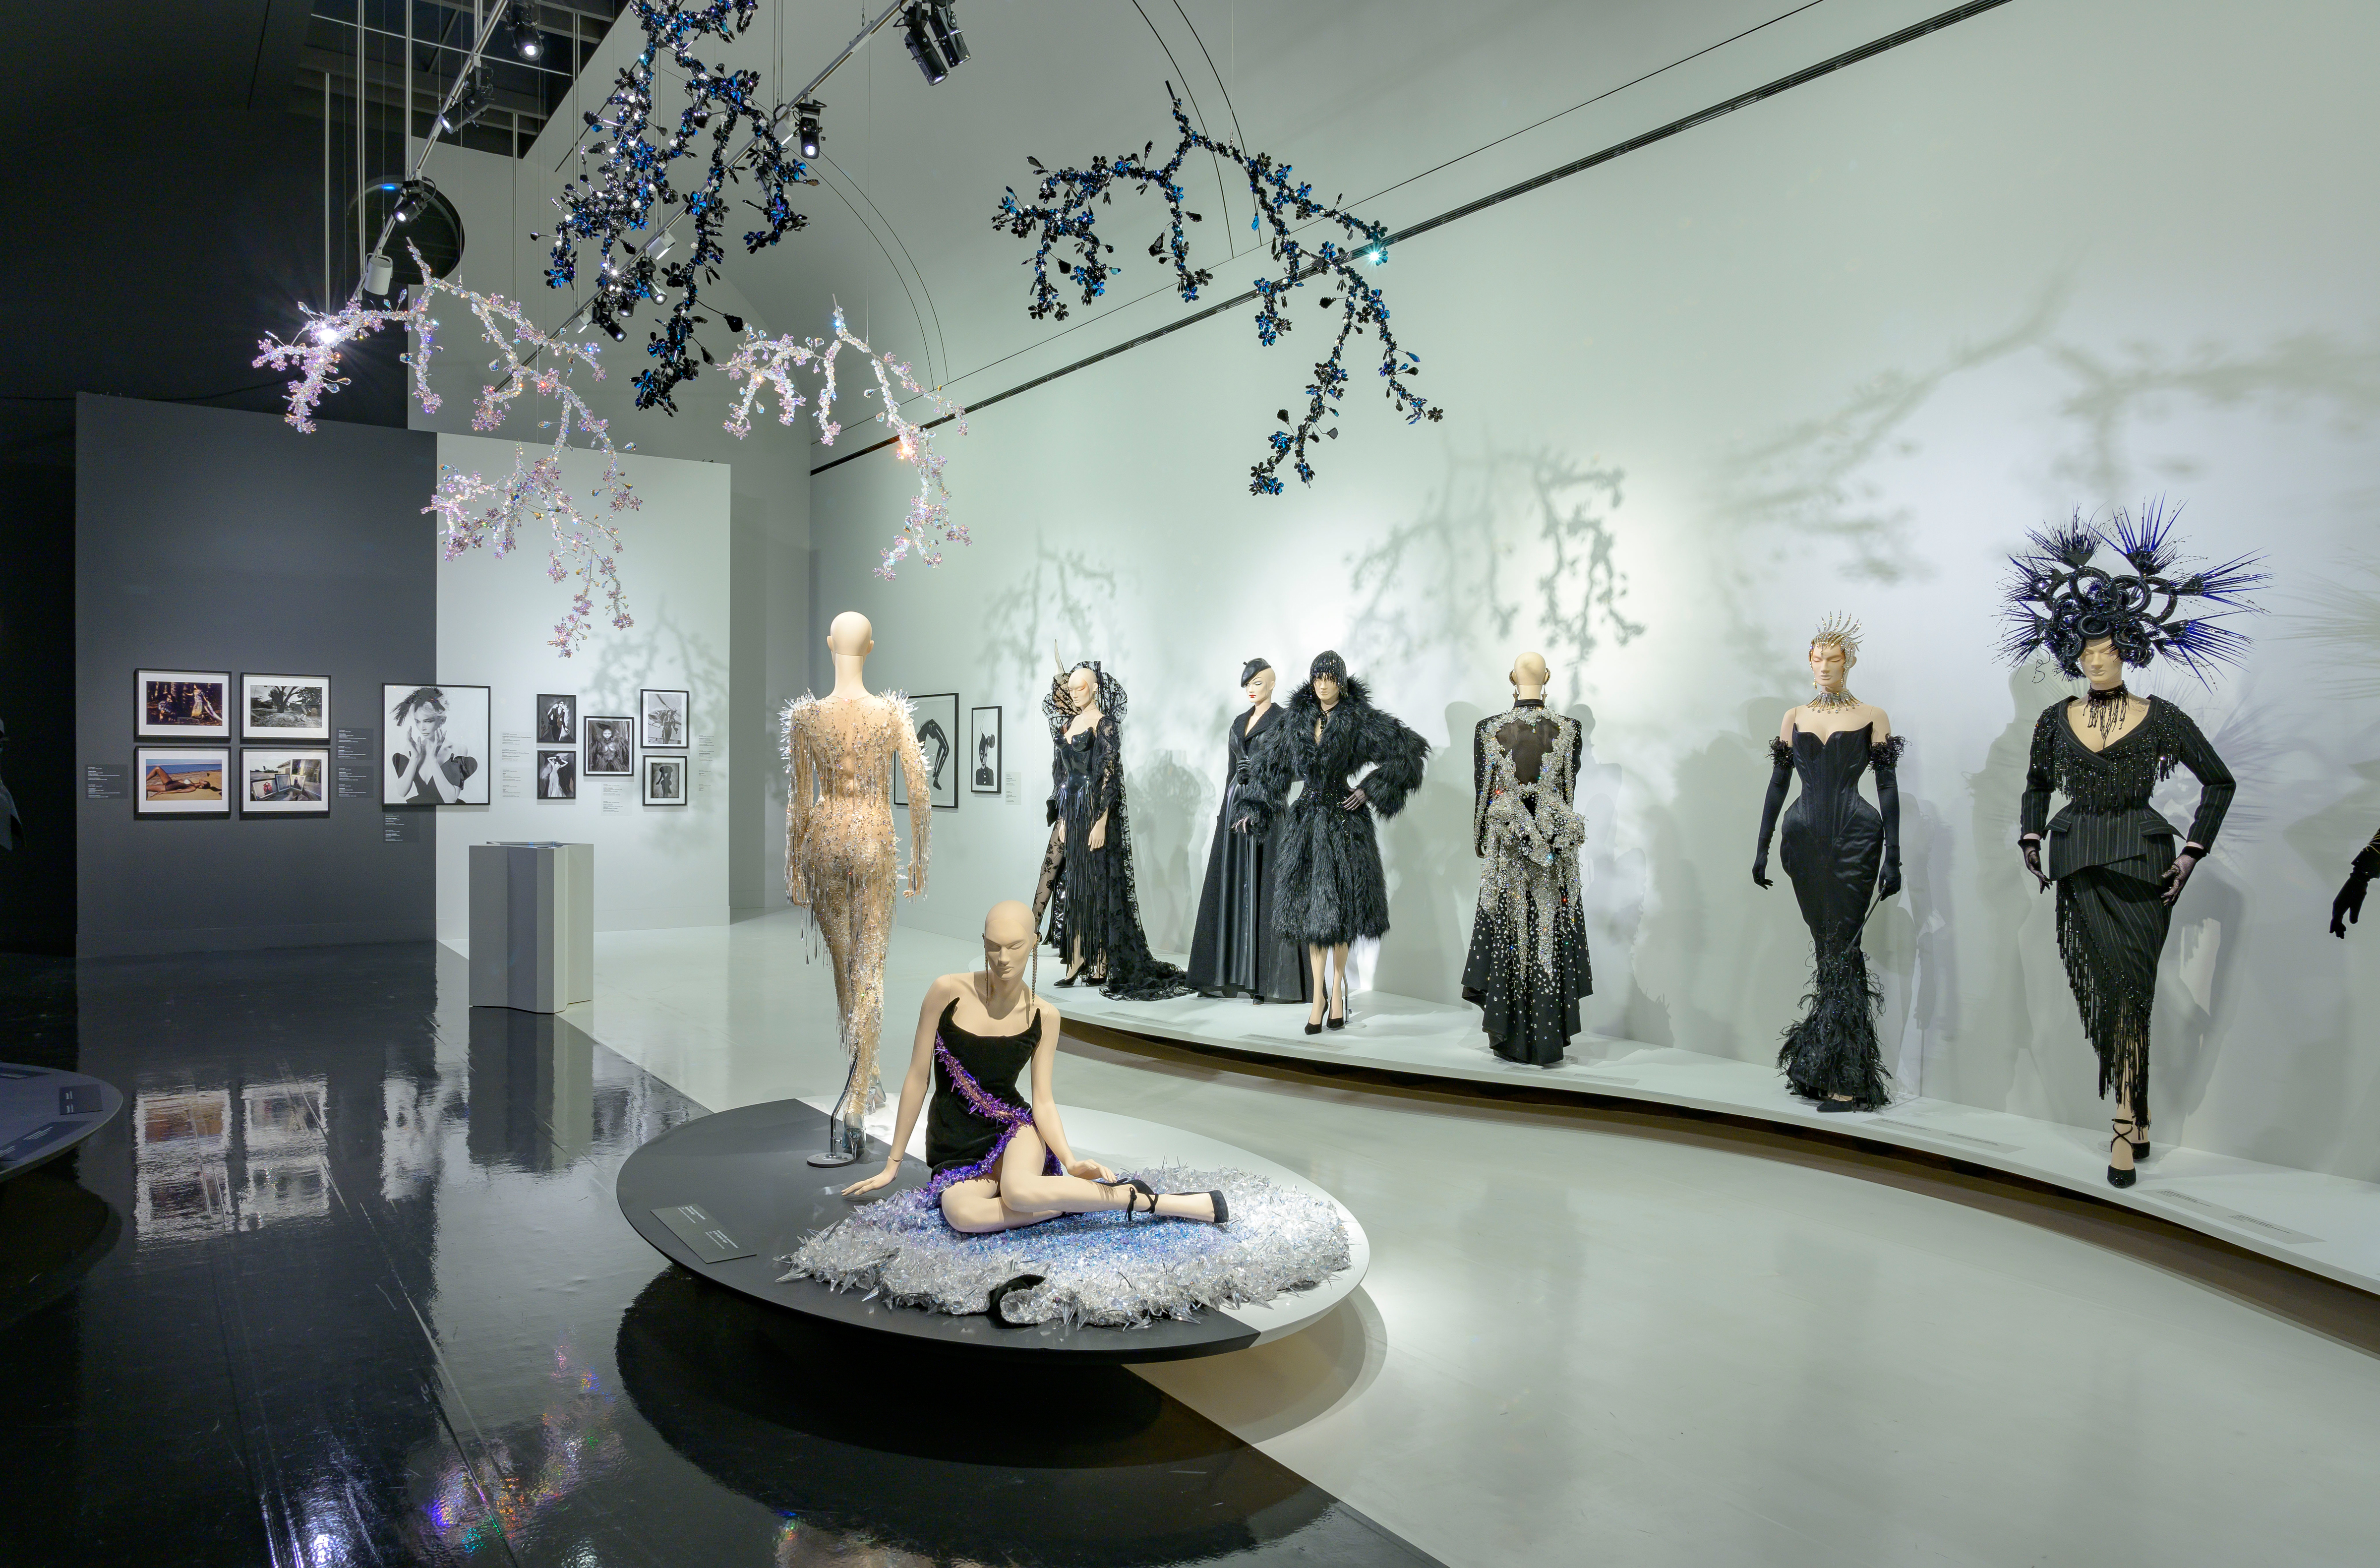 Blossoms shine at The Montreal Museum of Fine Arts’ Thierry Mugler: Couturissime exhibition